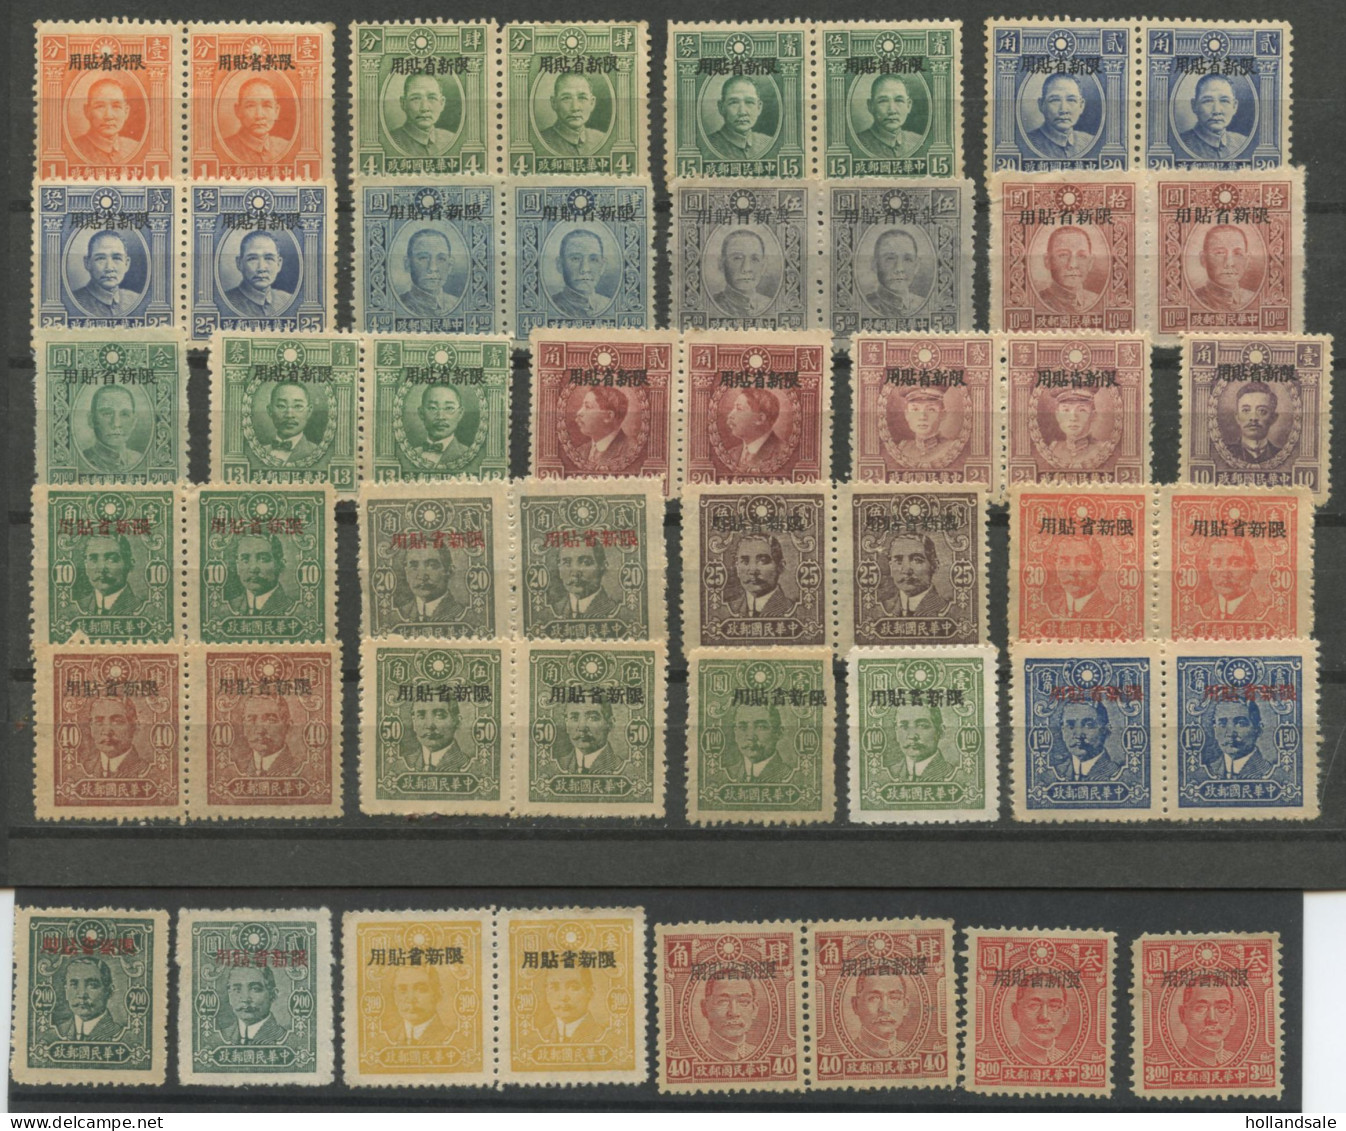 CHINA - SINKIANG - Selection Of Sinkiang Overprints. Most In Horz Pairs. Unused Without Gum. - Sinkiang 1915-49